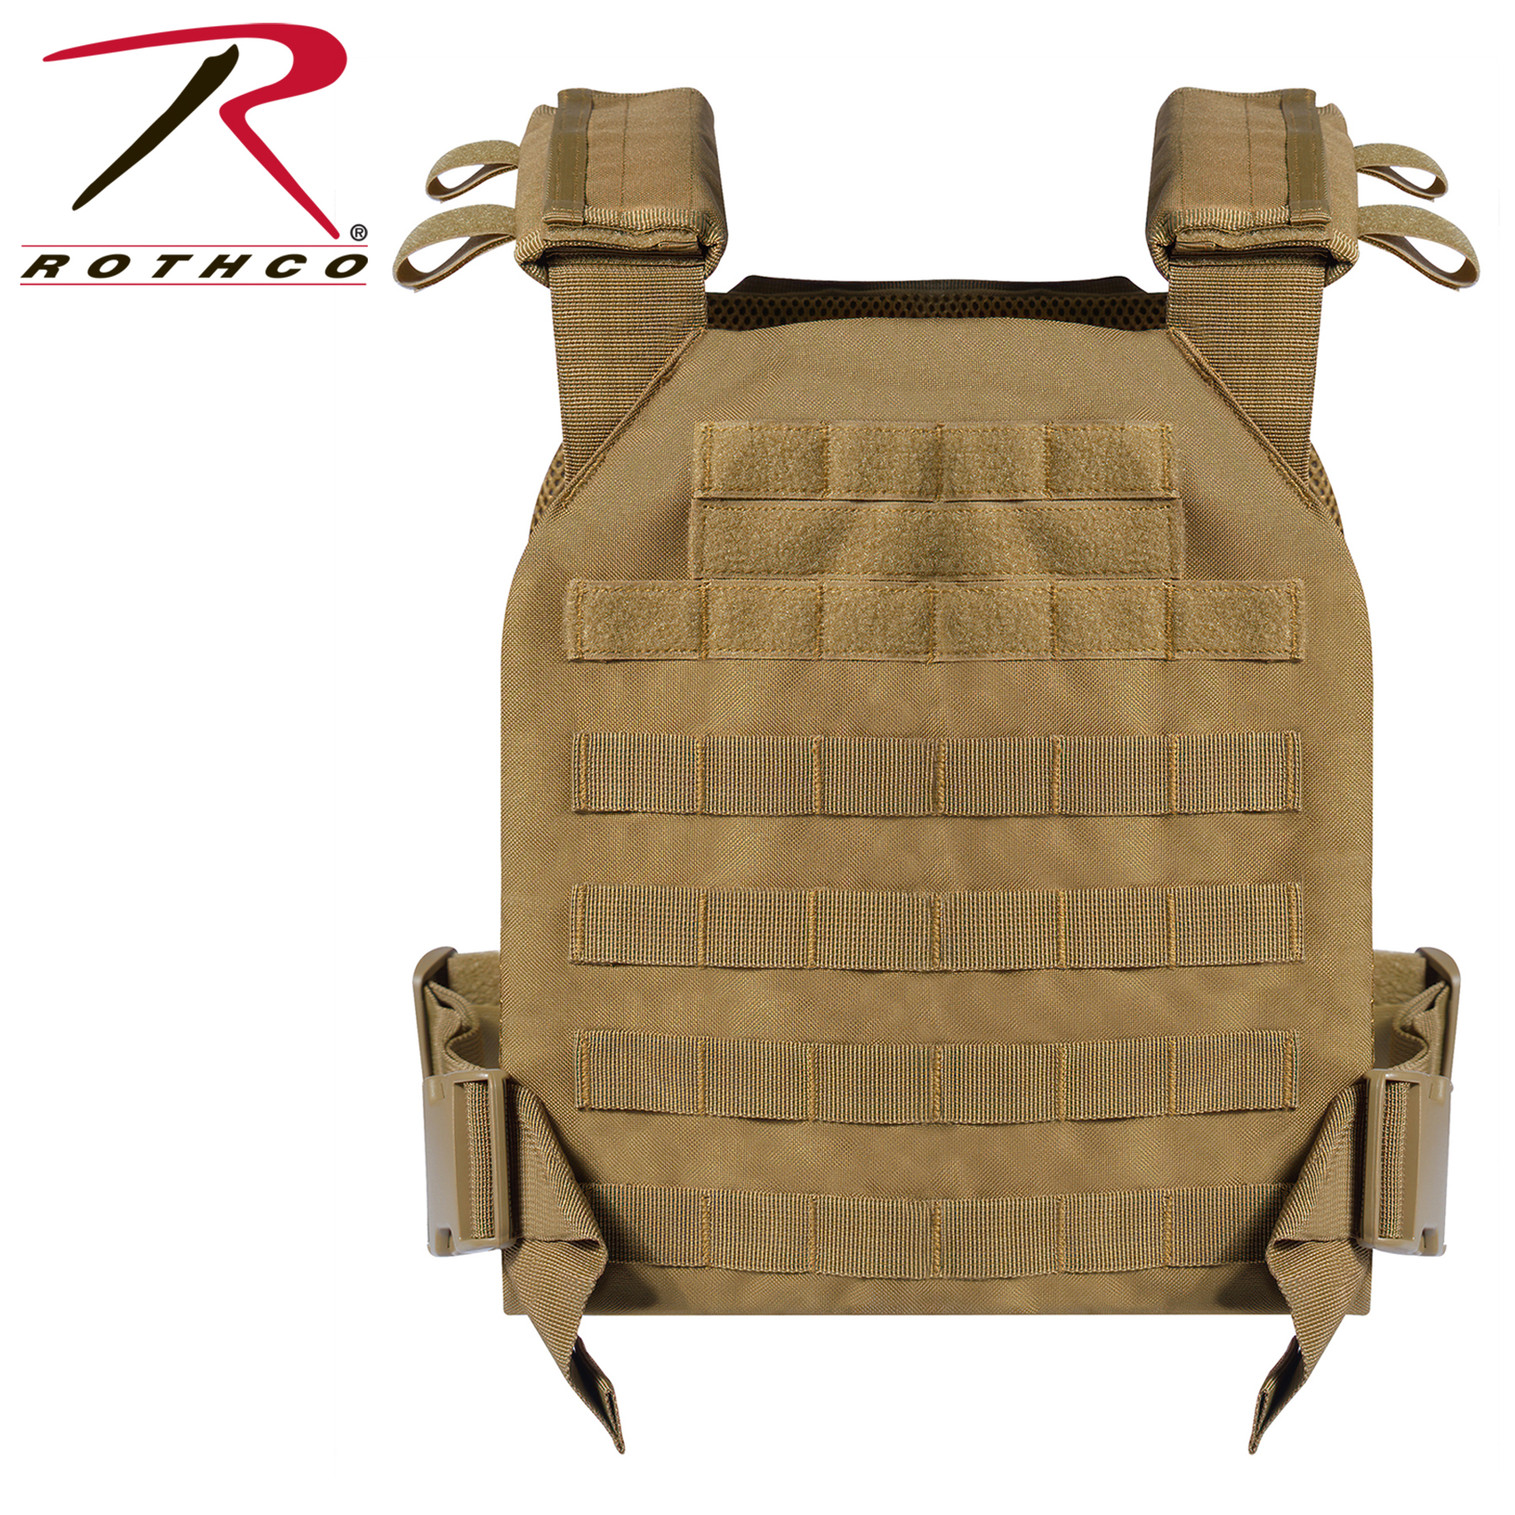 Rothco Low Profile Plate Carrier Vest - Coyote